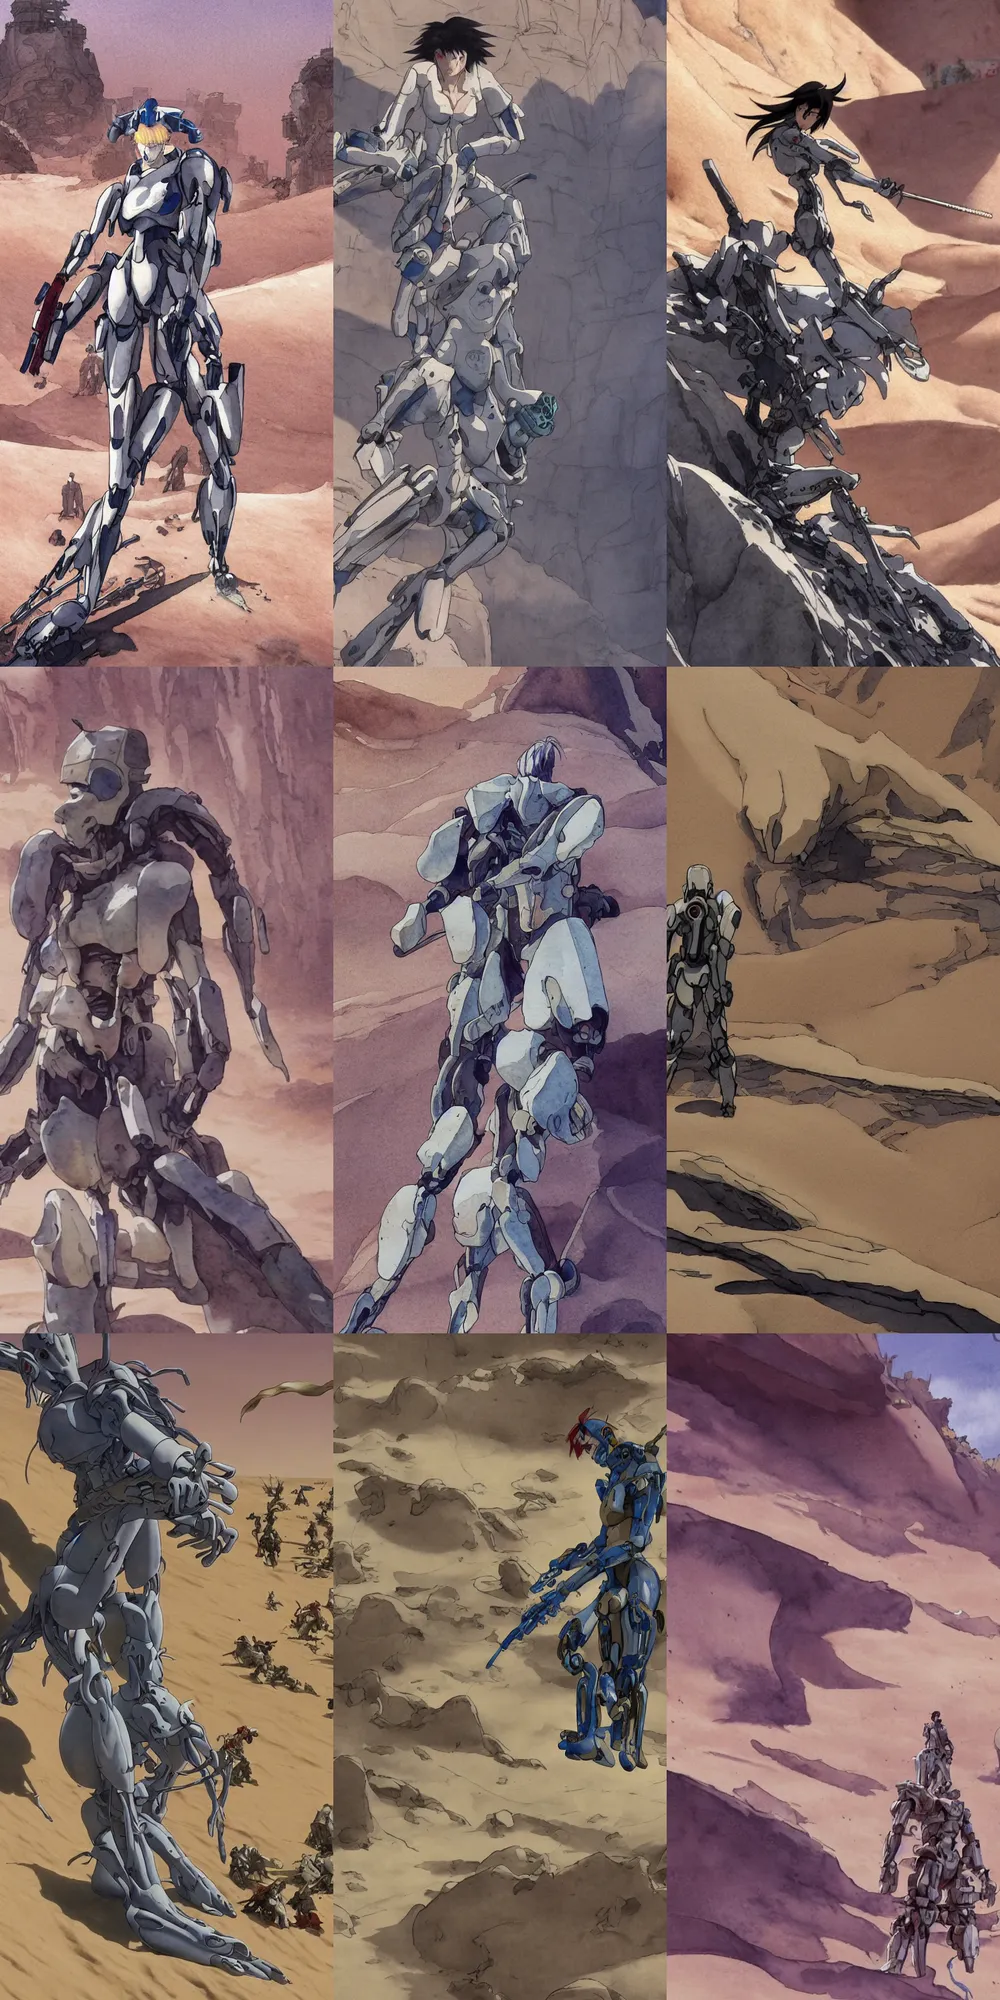 Prompt: incredible screenshot, simple watercolor, masamune shirow ghost in the shell movie scene close up broken Kusanagi, giant robot bonesn spine and ribs in the desert sand dunes, in the desert, crazy looking rocks, deep chasm, rock climbing , nausicaa, cracks, brown mud, dust, take cover, bullet holes,, memorable scene, red, blue, orange, cool hair, odd pipes, metallic reflections, refraction, bounce light, phil hale, Yoji Shinkawa, bright rim light, hd, 4k, remaster, dynamic camera angle, deep 3 point perspective, fish eye, dynamic scene